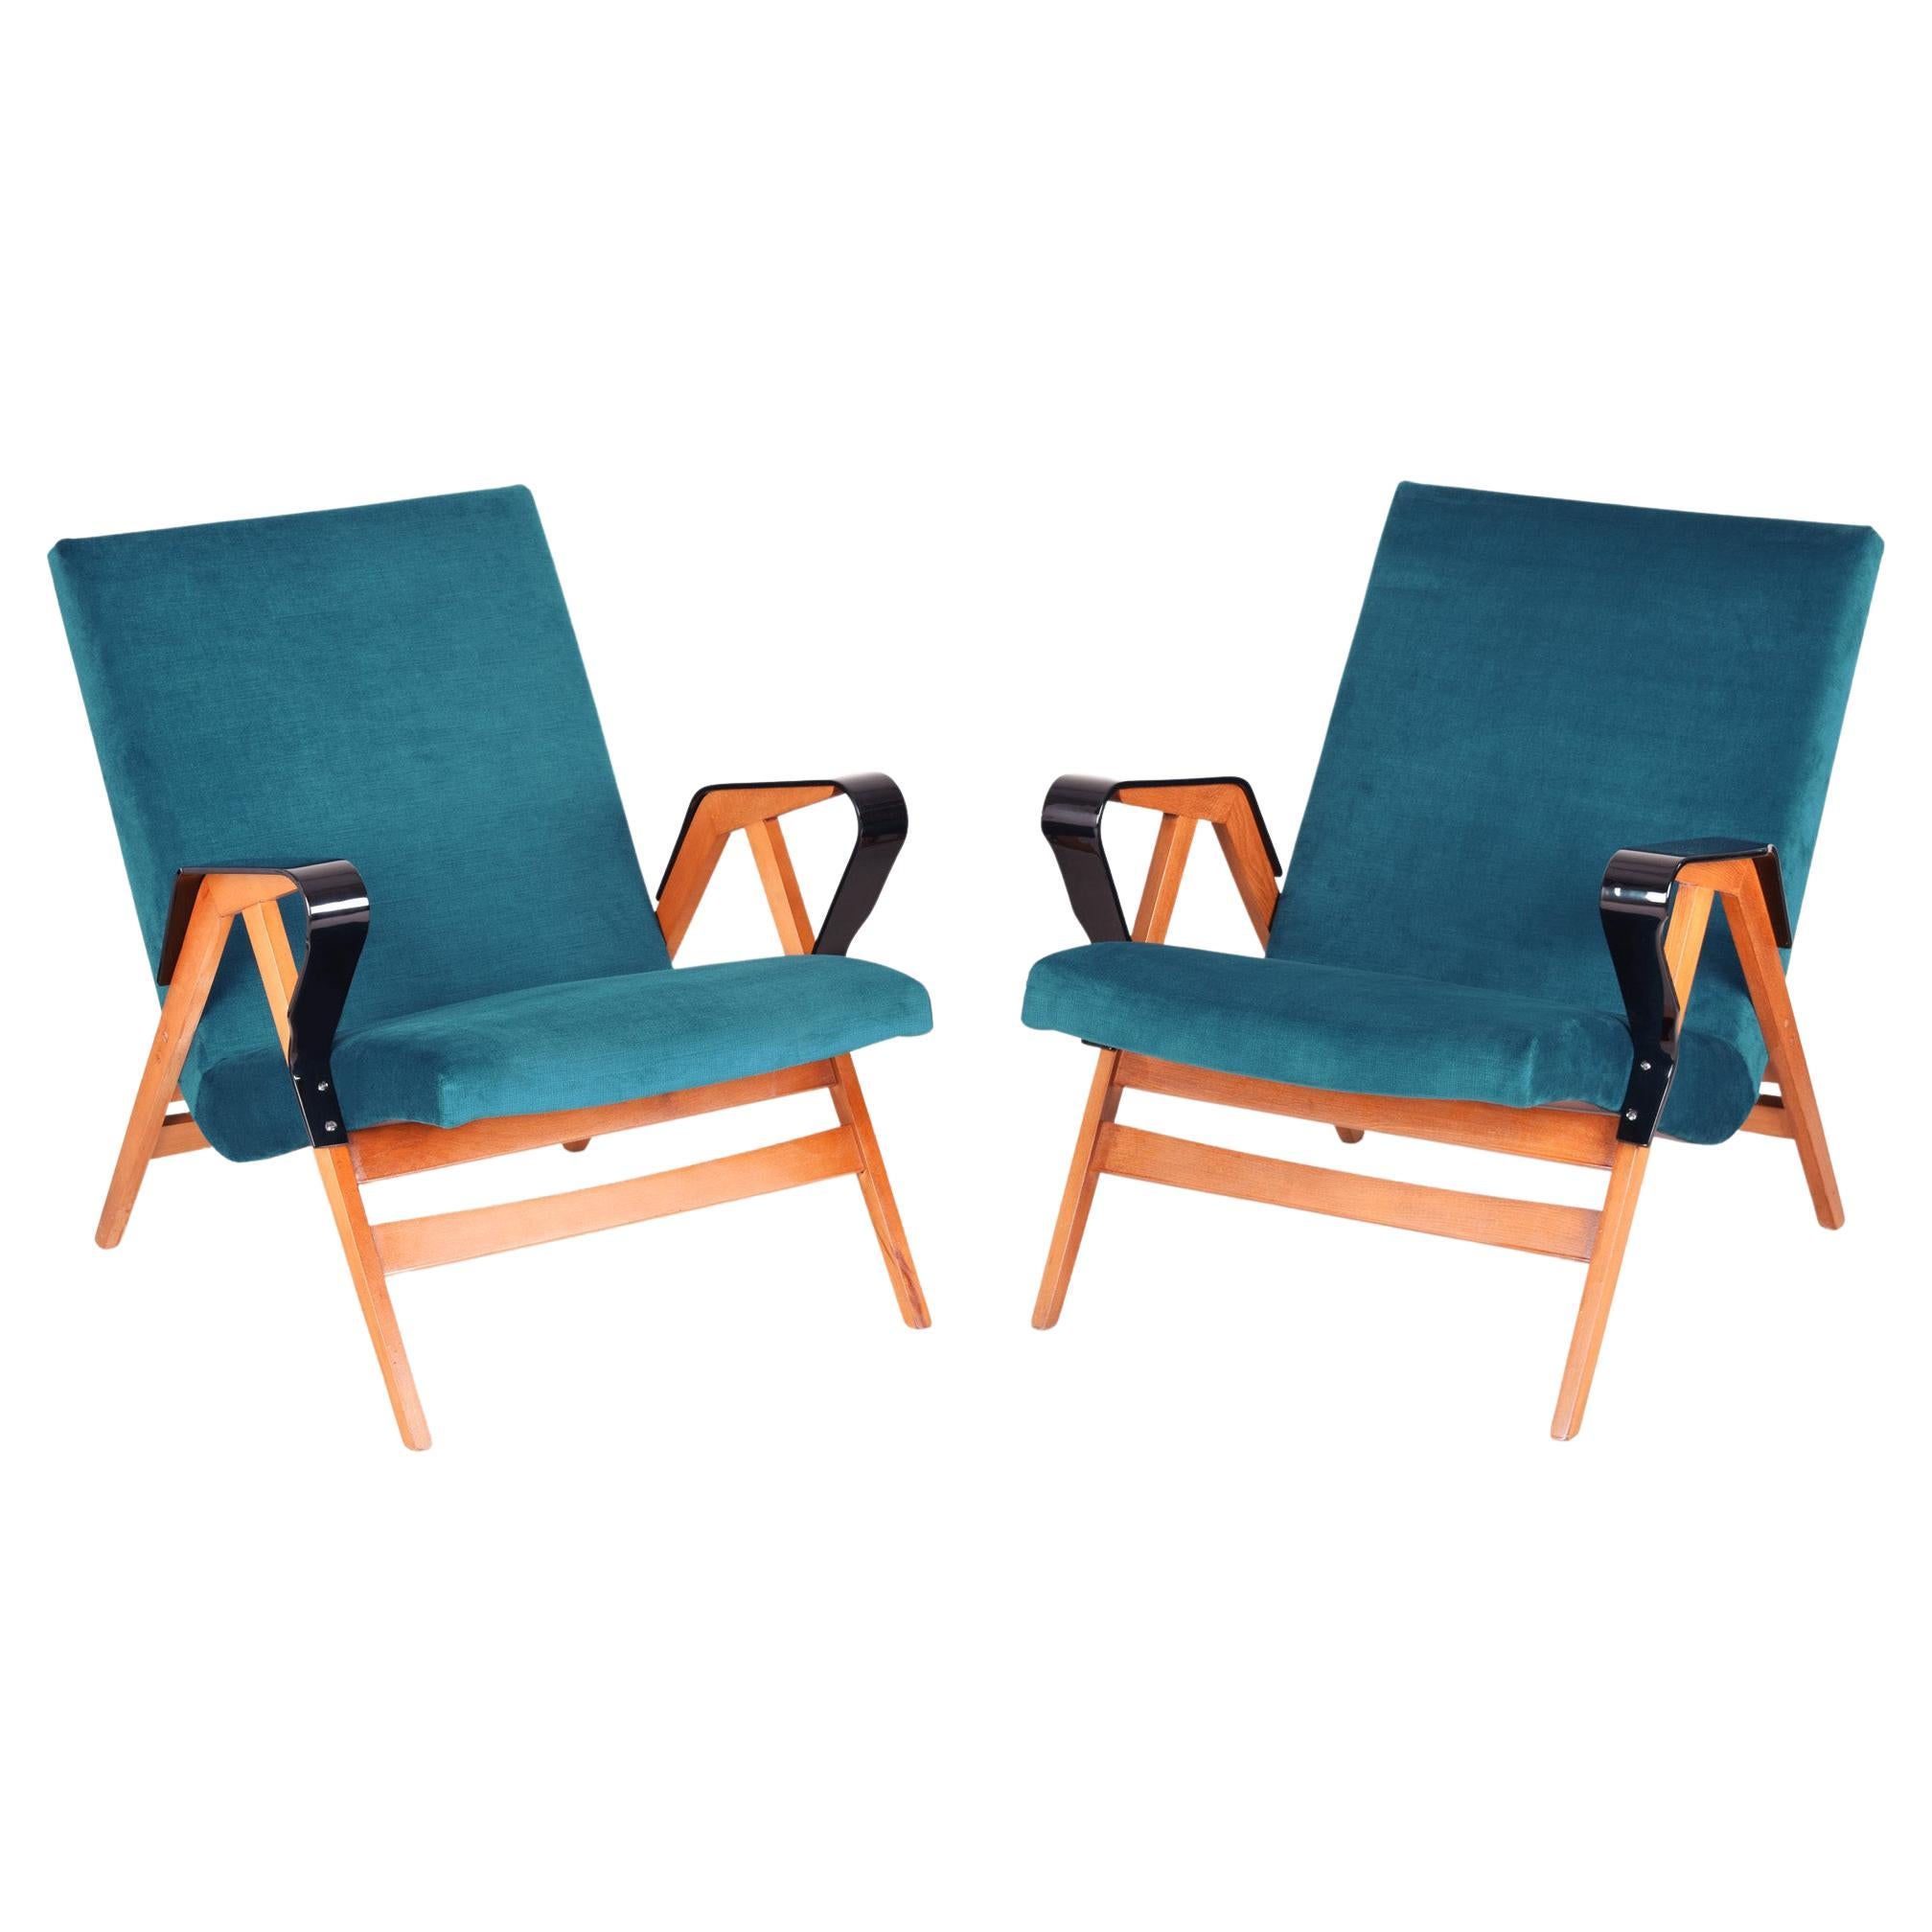 Pair of Blue Midcentury Armchairs, Made by Tatra Pravenec, 1950s Czechia For Sale